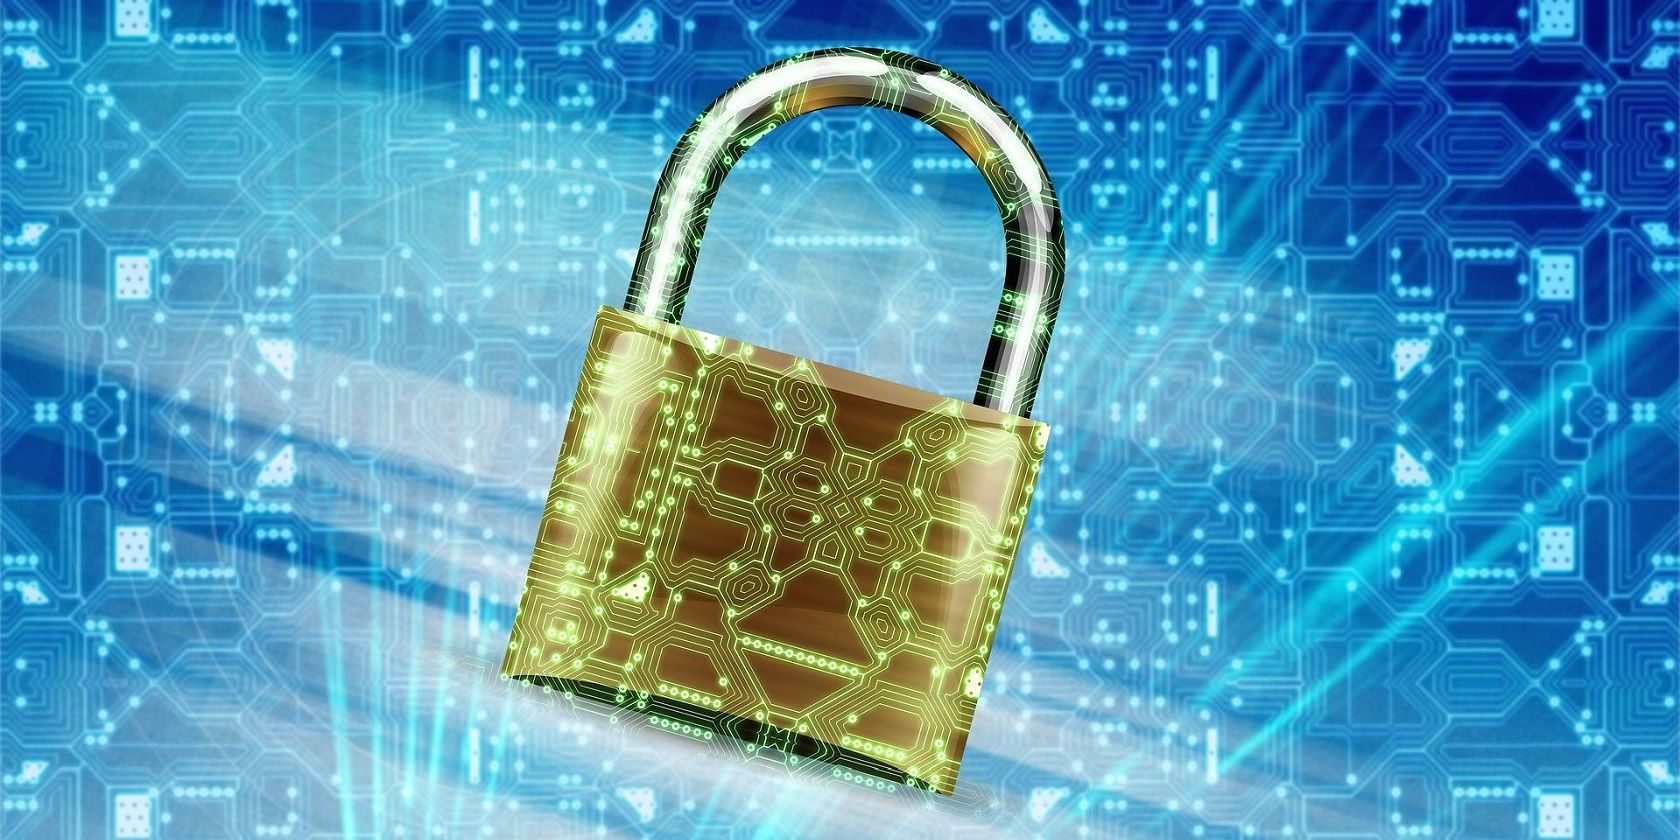 Image shows a gold lock over a blue background with electronic designs running through the entire image.